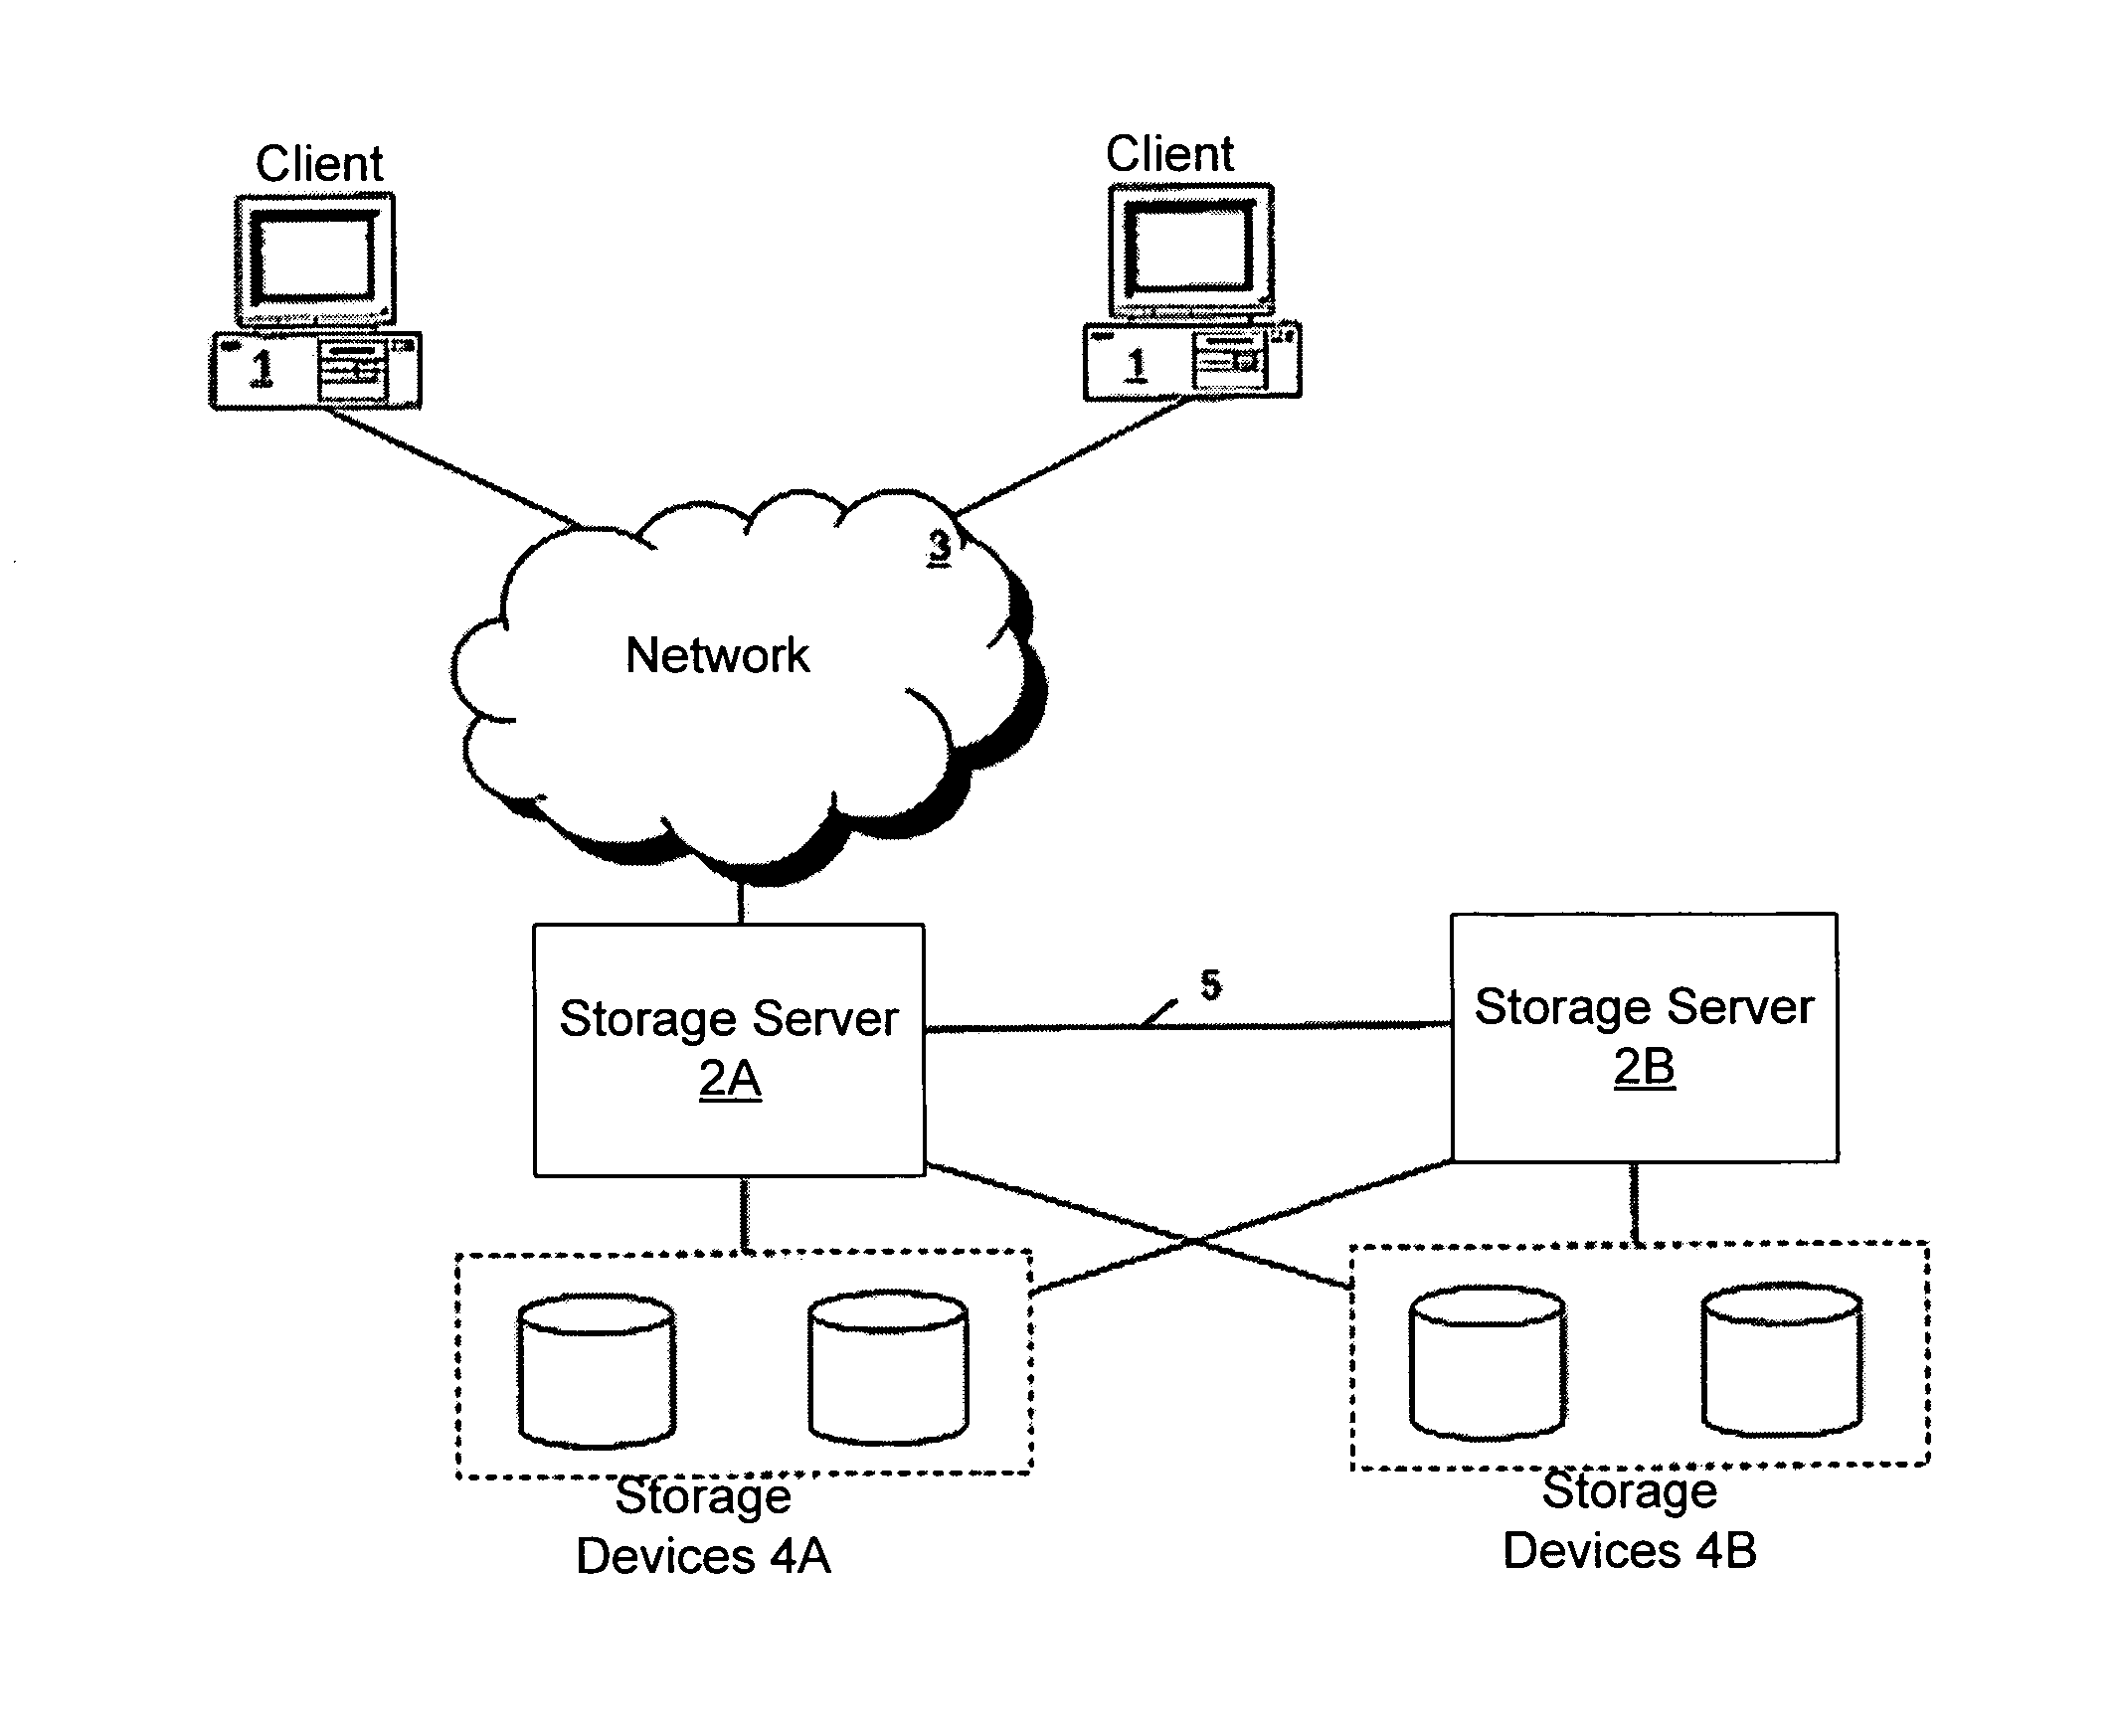 Increased concurrency of an initialization process of multiple data storage units of a volume